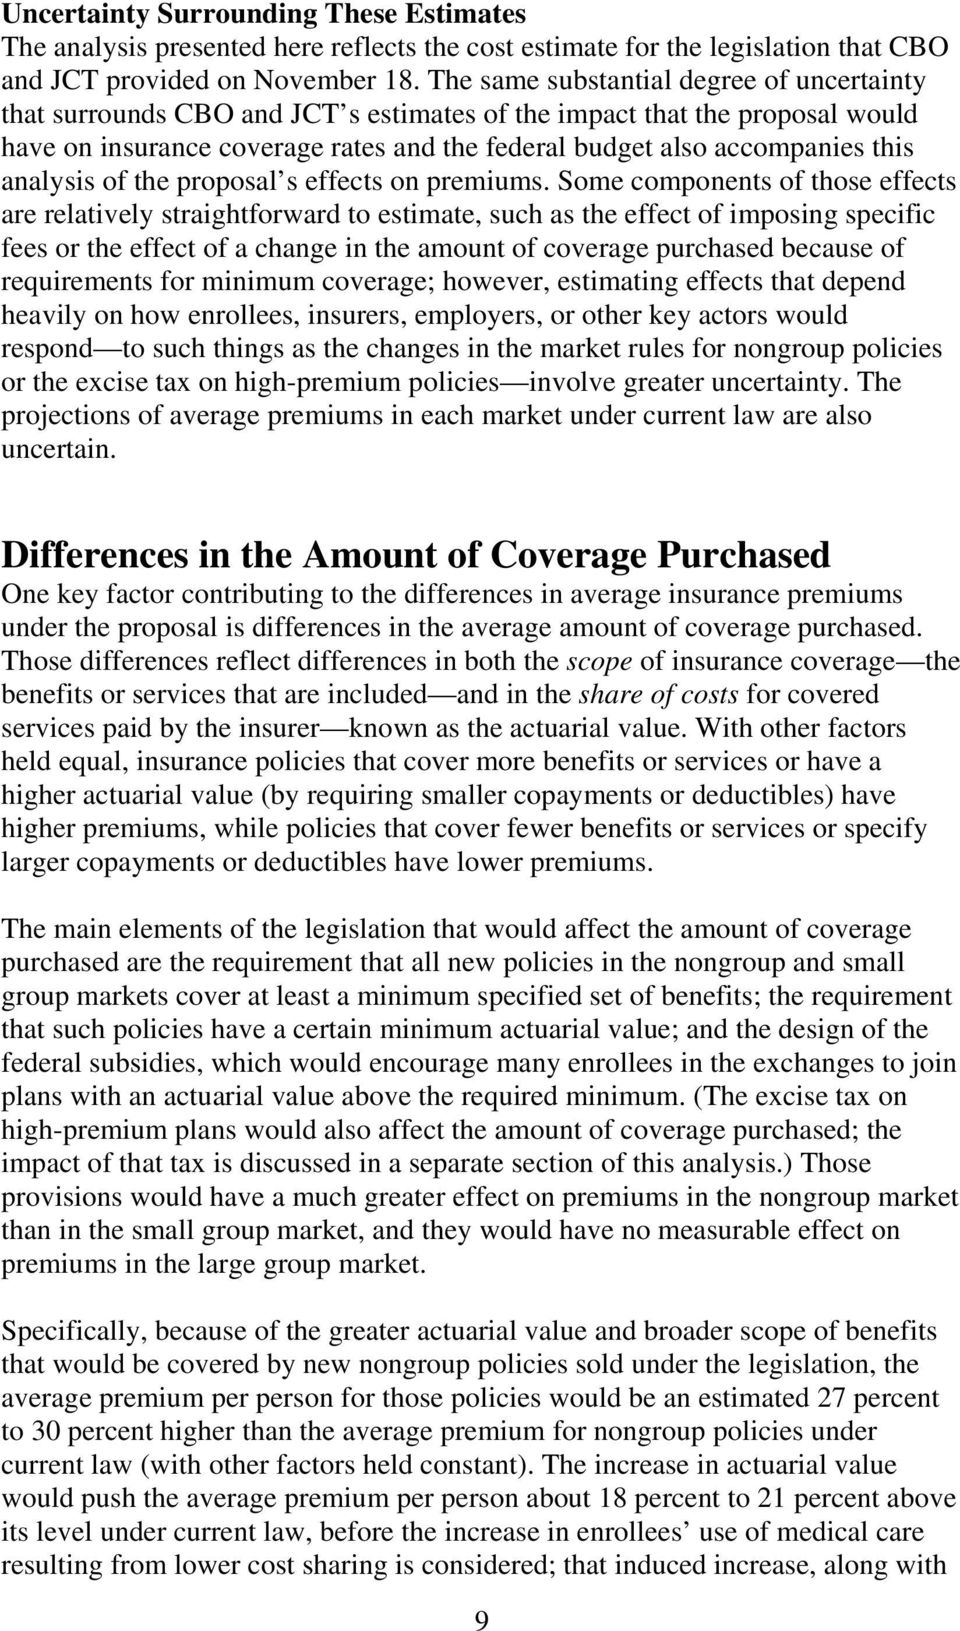 analysis of the proposal s effects on premiums.